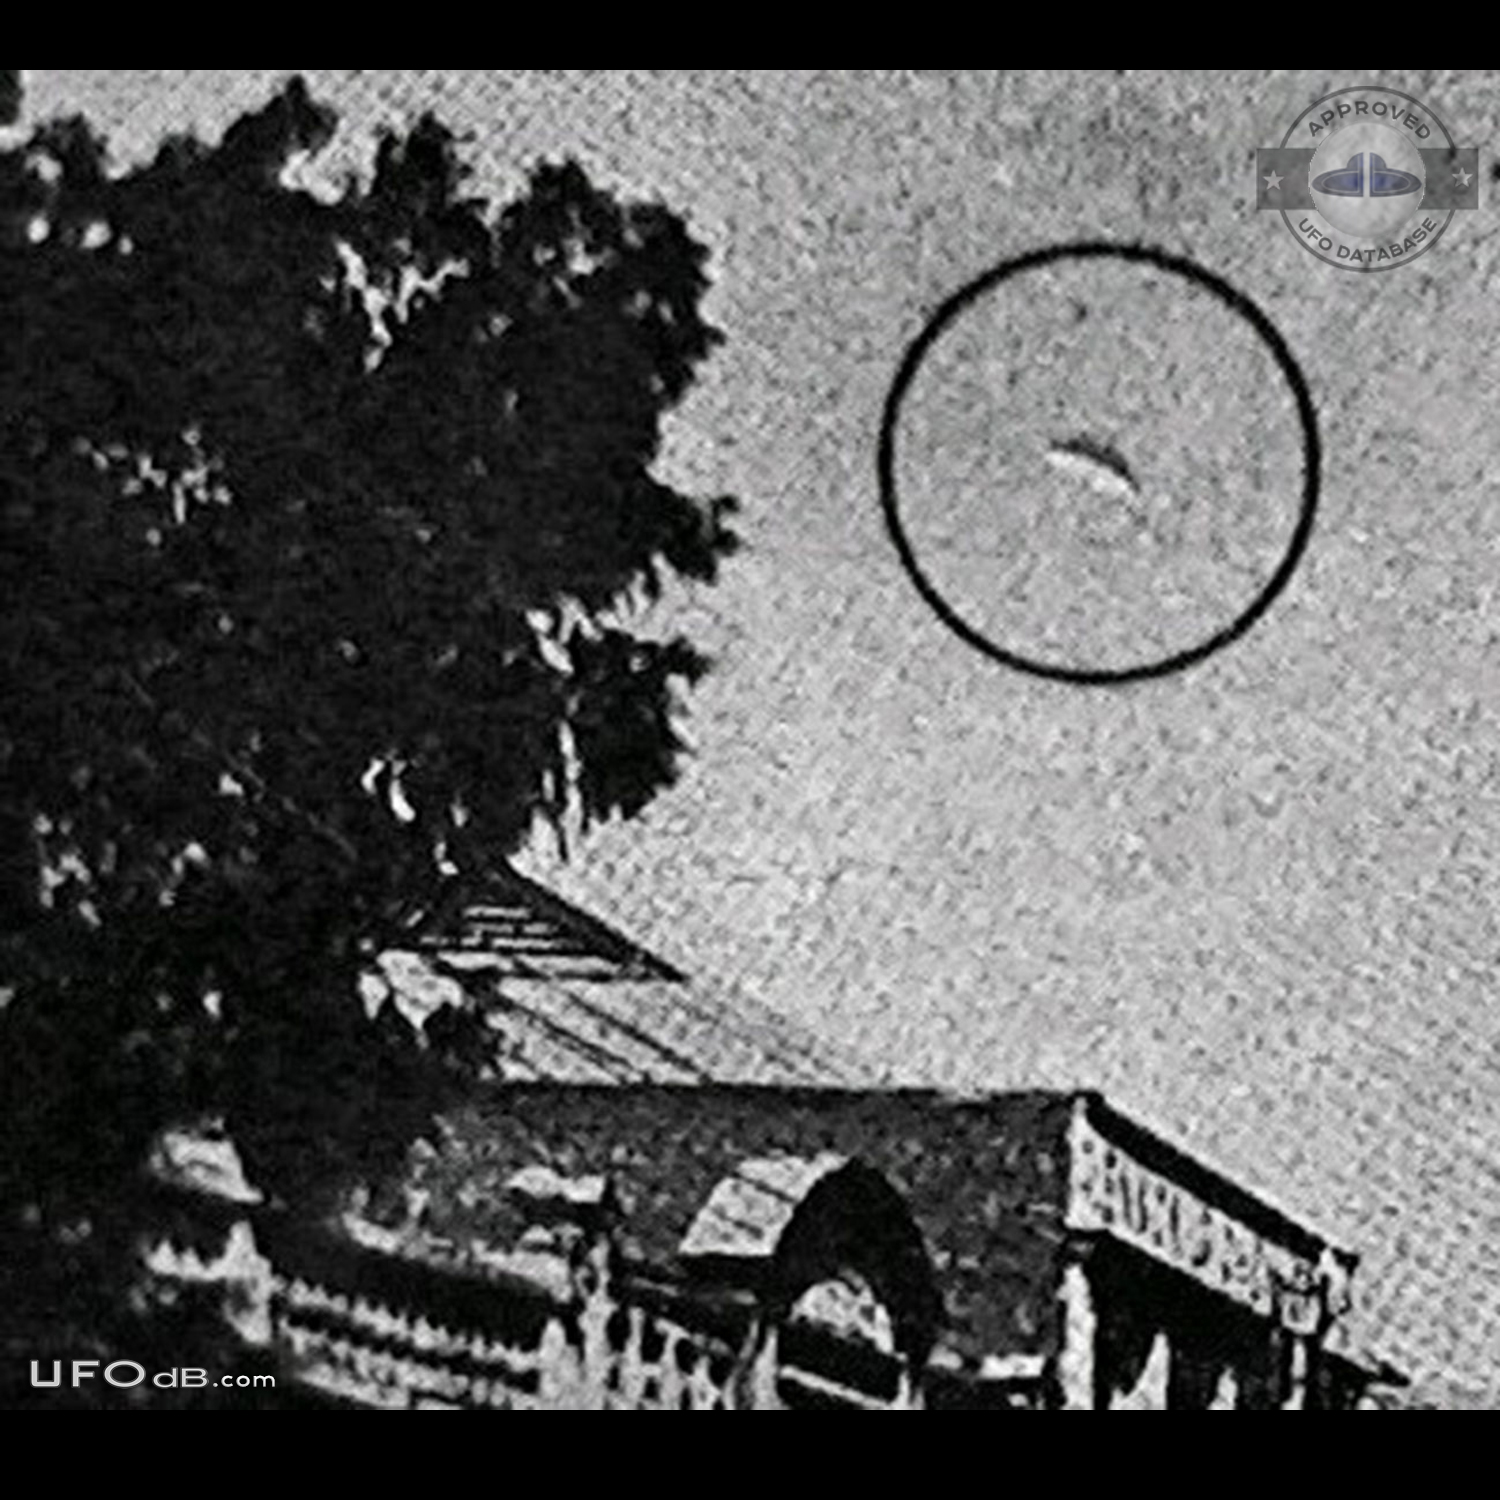 Very Old UFO Picture showing Saucer over Germiston South Africa 1916 UFO Picture #632-1